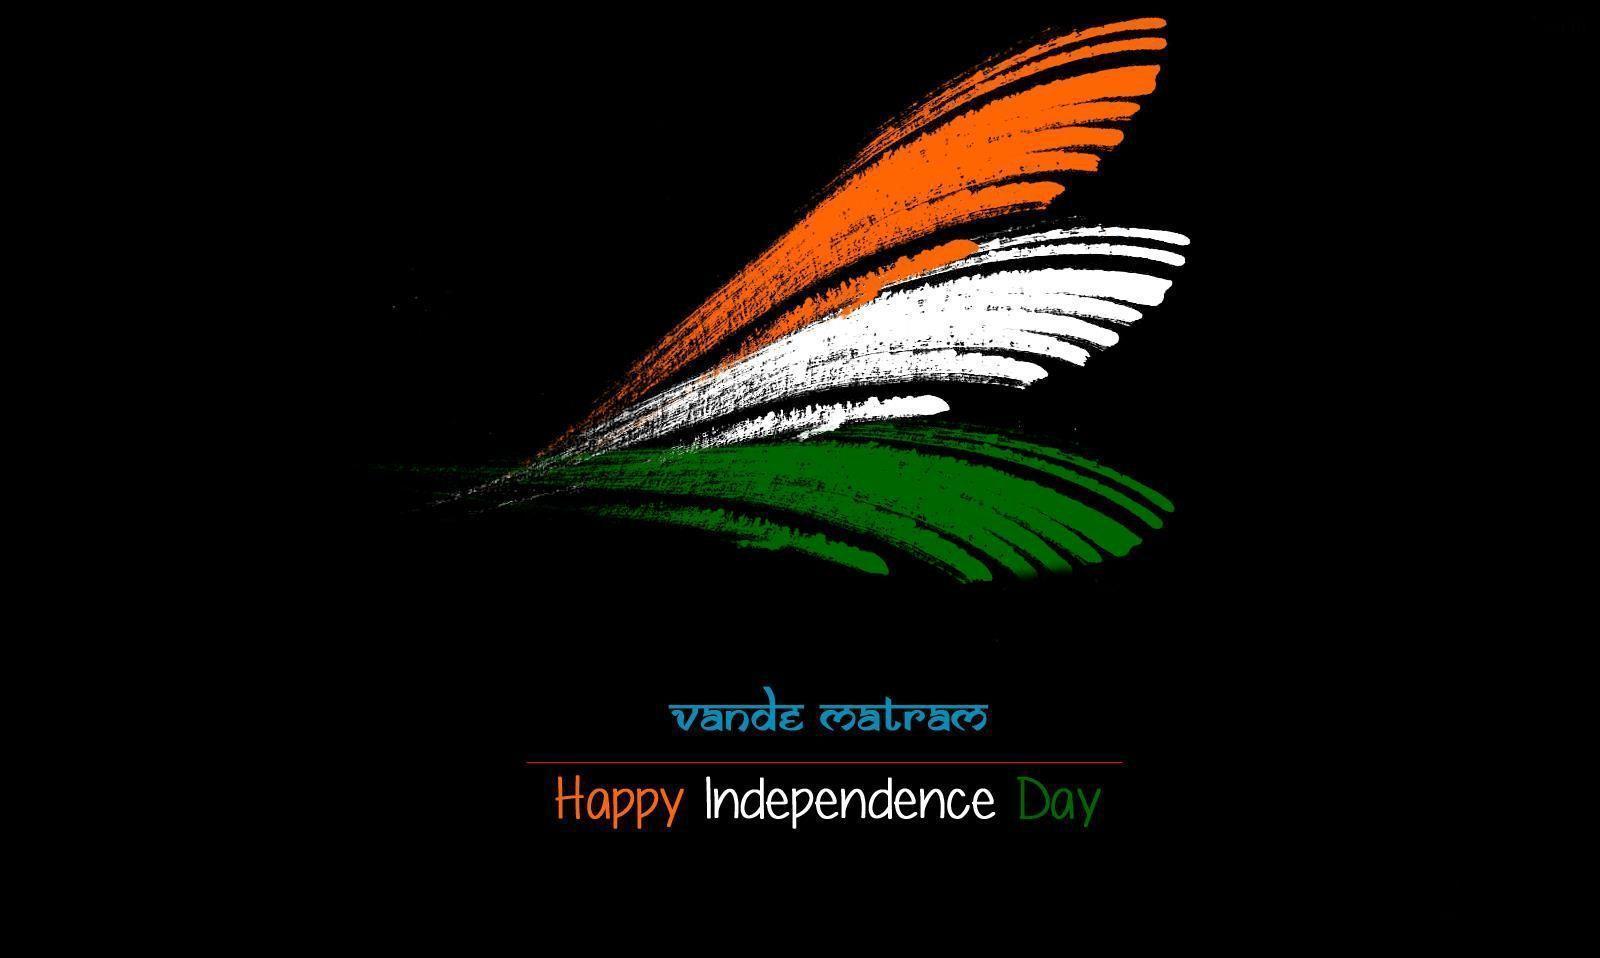 Happy Independence Day Image. Happy Independence Day Photo